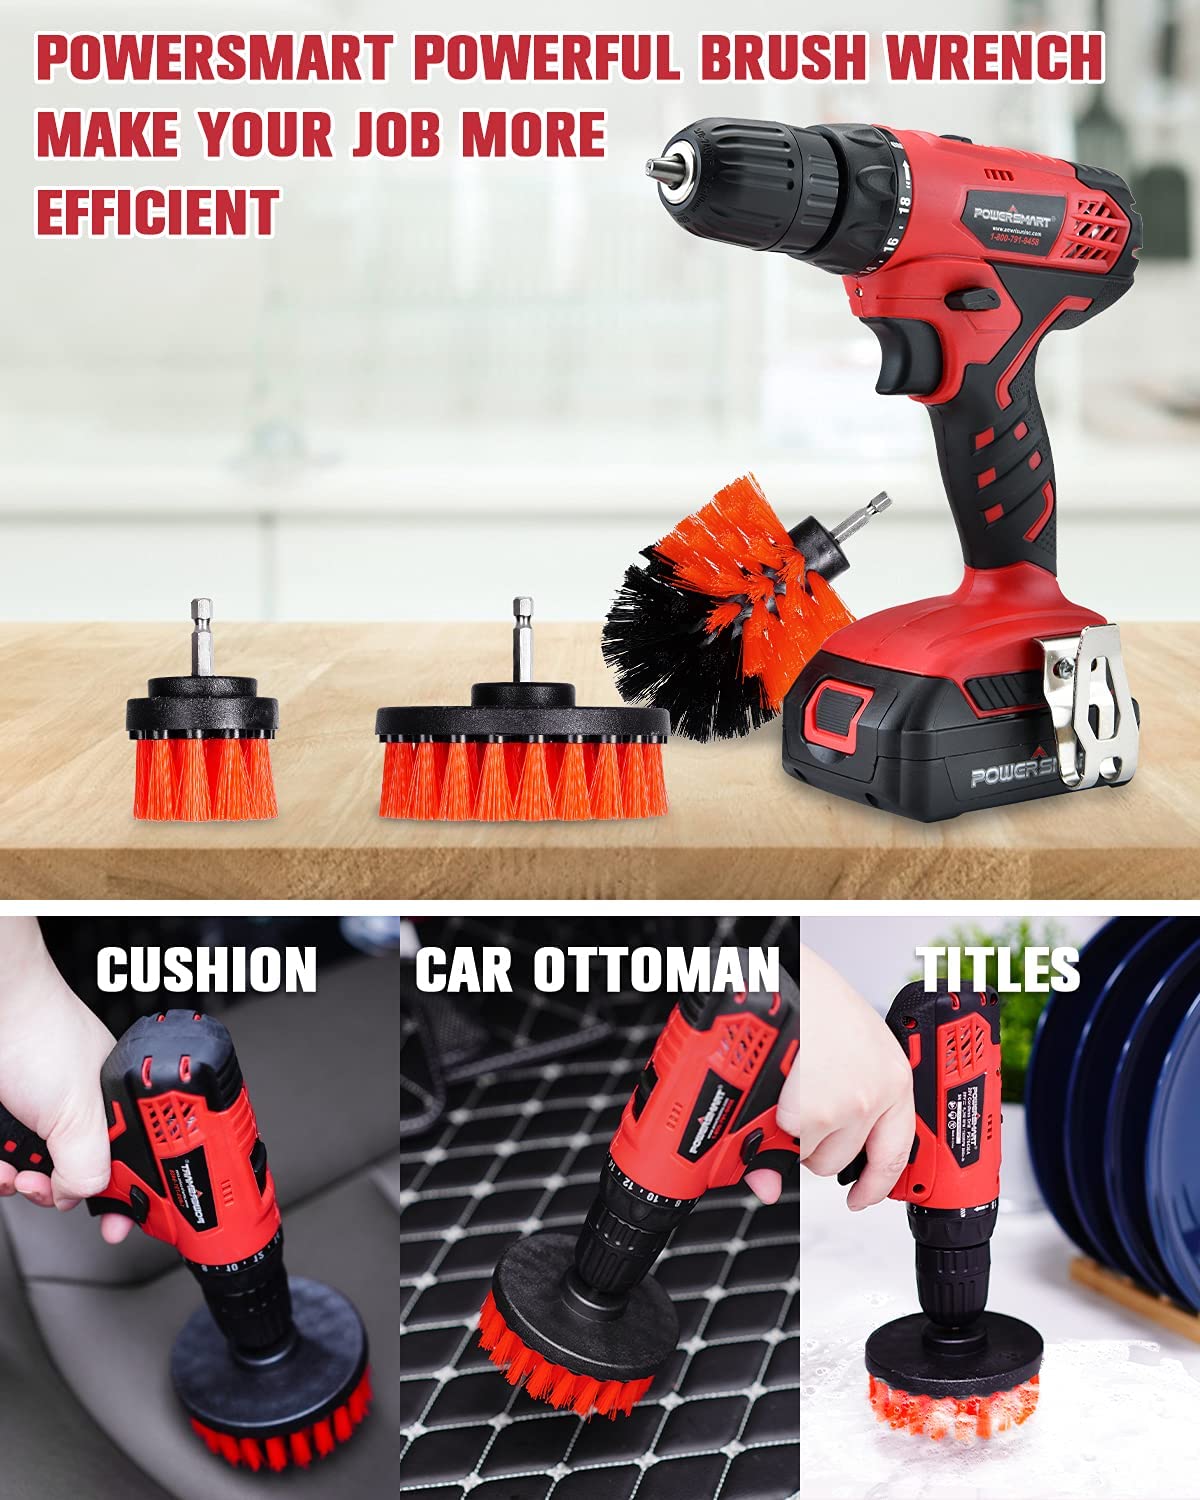 PowerSmart Cordless Drill Driver, 20V Drill Driver Brushes, 300 in-lb Torque Impact Drill Driver, 3/8'' Chuck, Power Drill Driver Built-in LED, 1.5Ah Lithium-Ion Battery & Charger Included